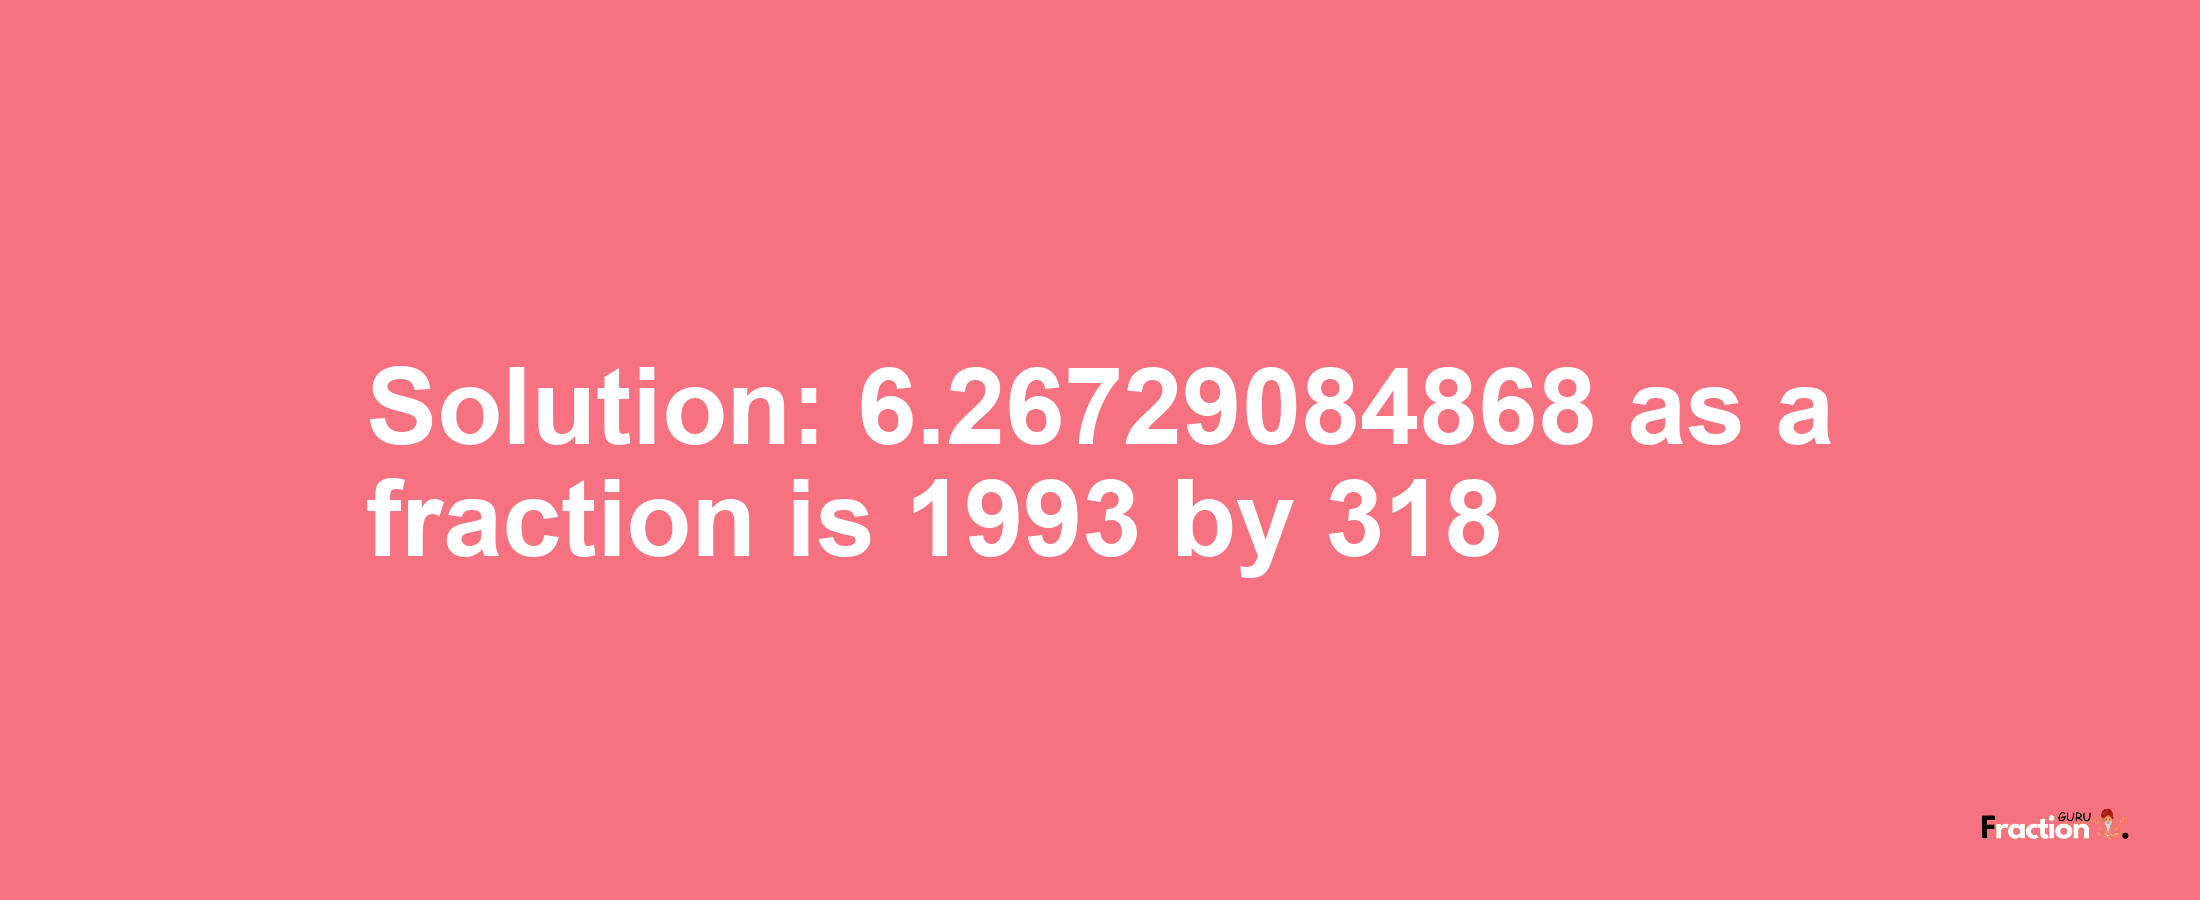 Solution:6.26729084868 as a fraction is 1993/318